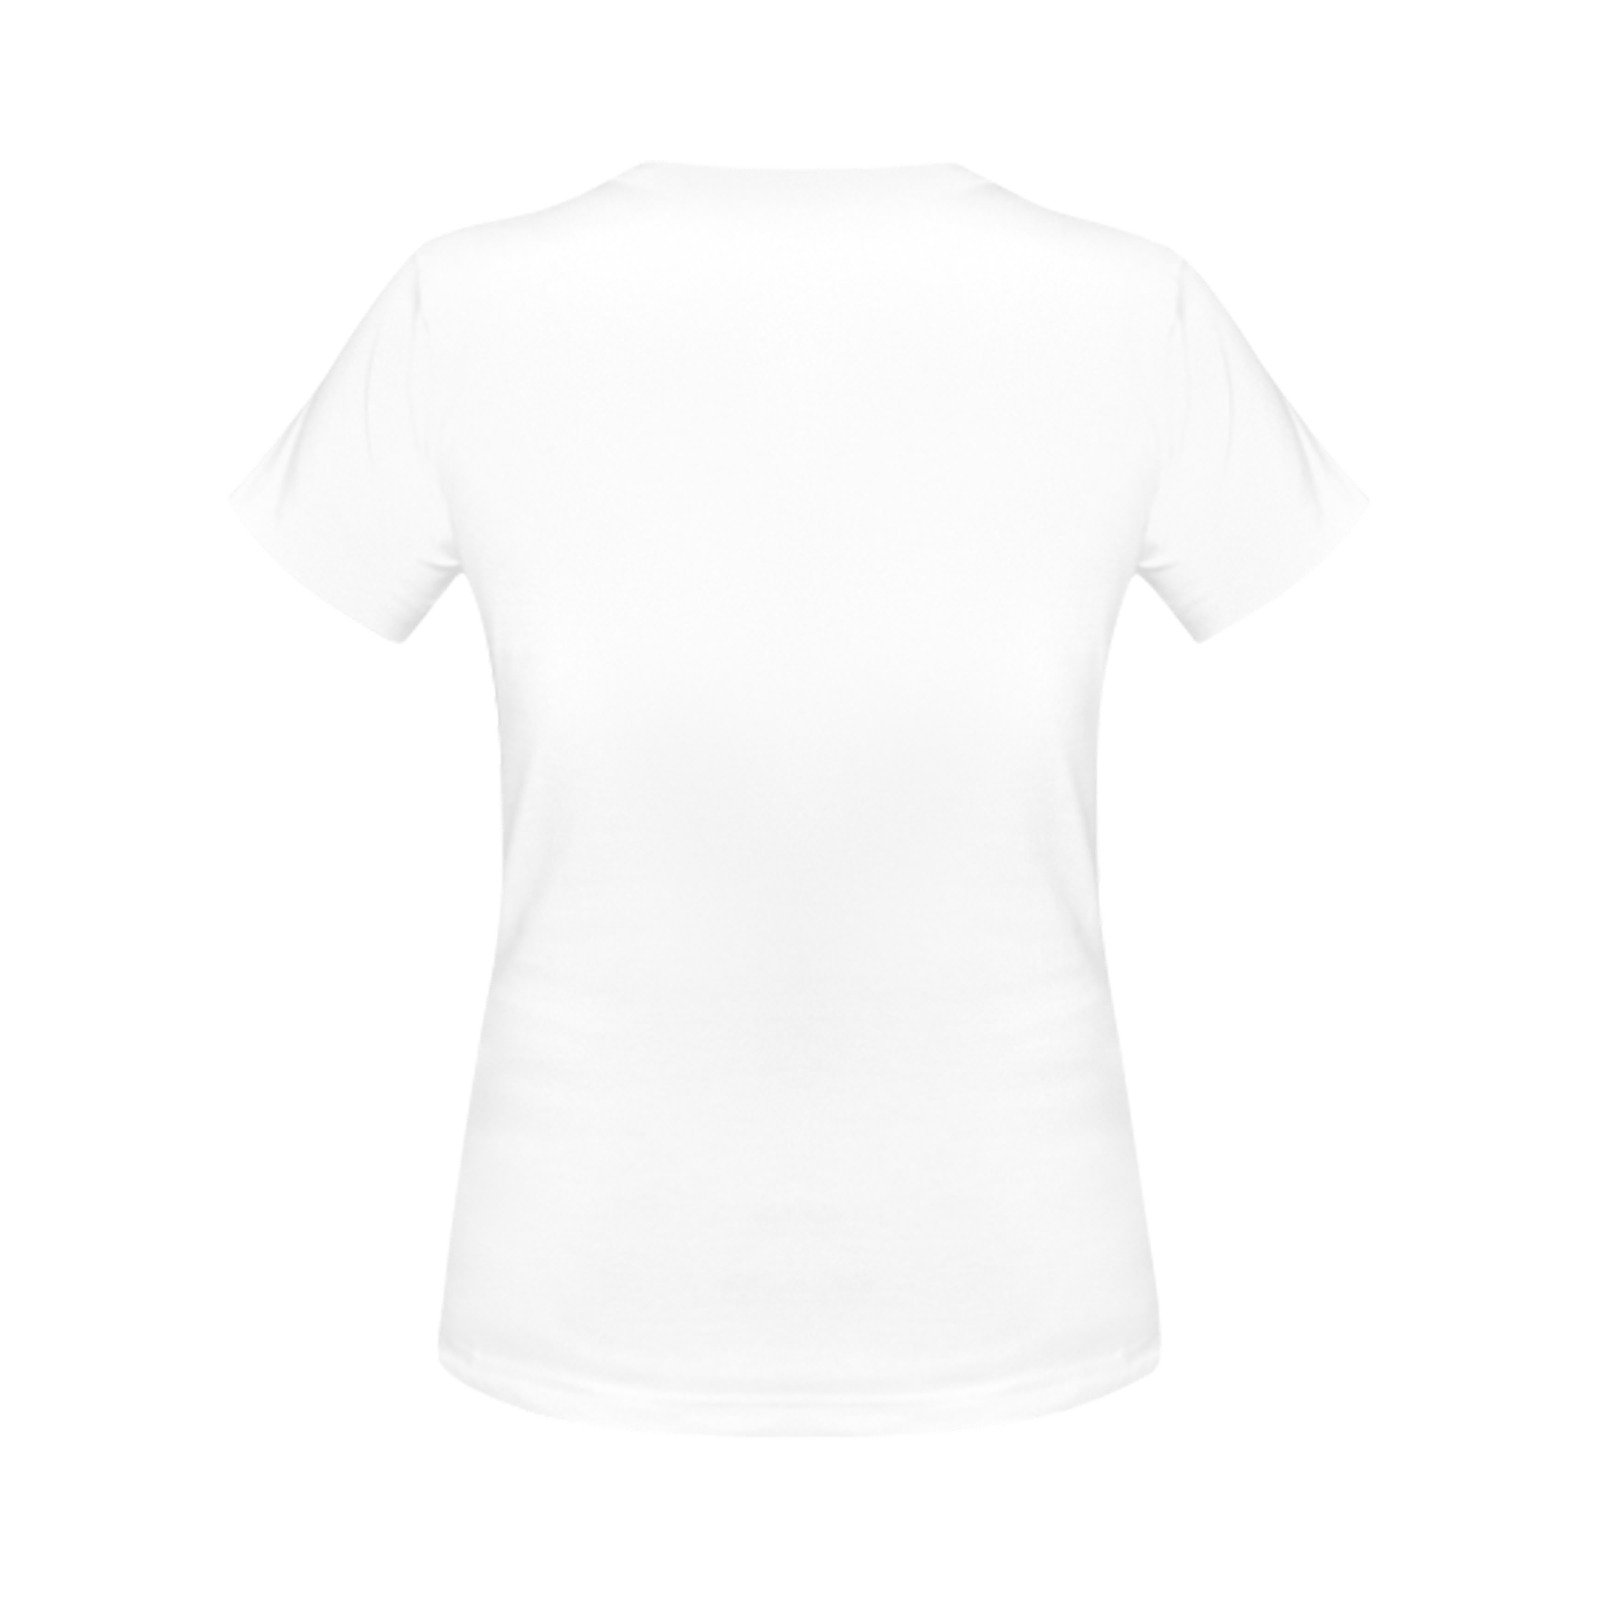 D.D.A.LOGO.WHT.TOURQ. Women's T-Shirt in USA Size (Front Printing Only)